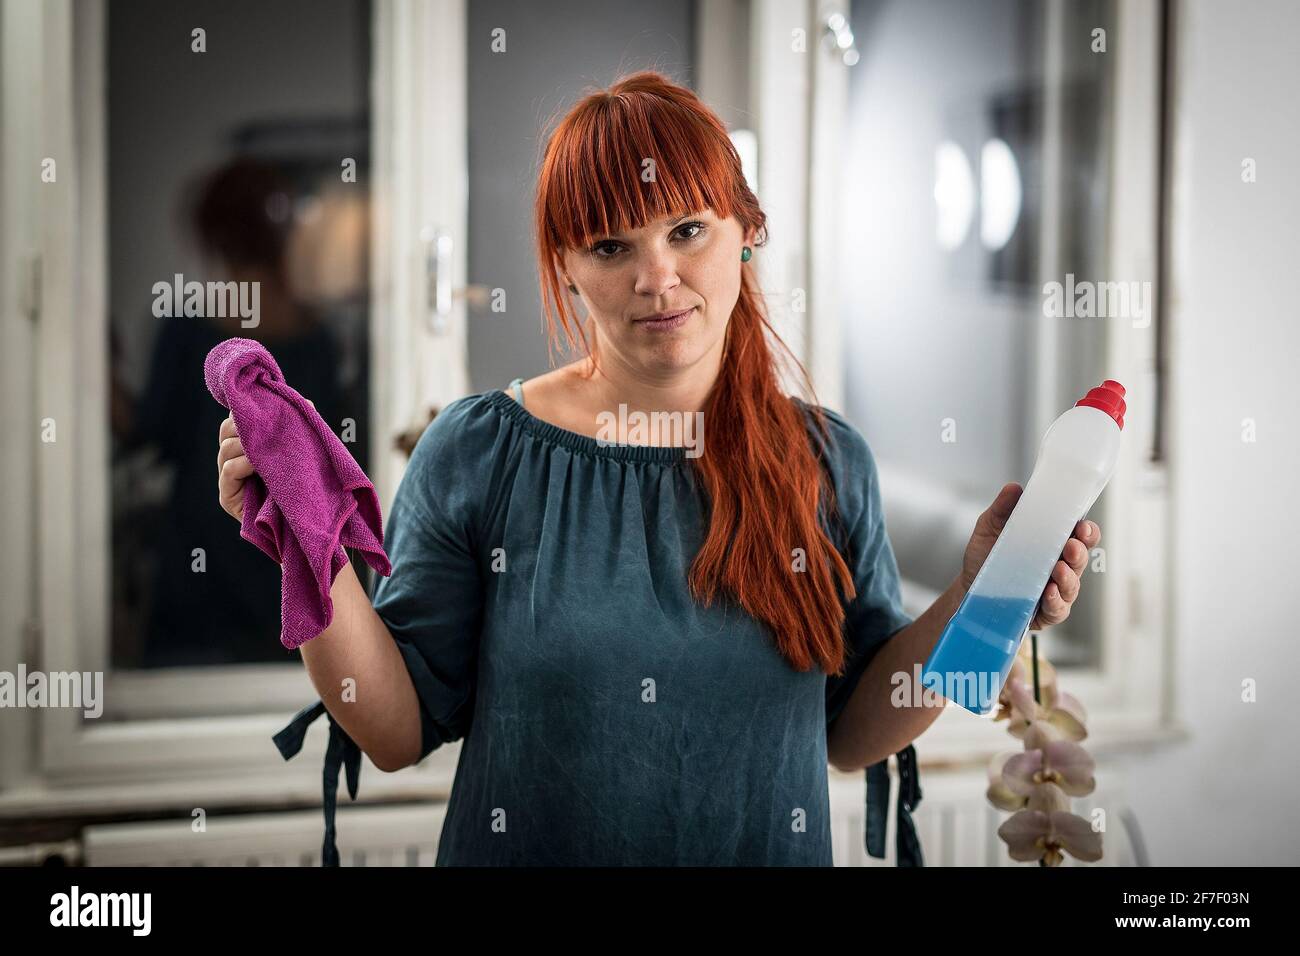 A young woman is sad and holding a bottle of cleaner and a mop in her hands, standing in a living room. Stock Photo